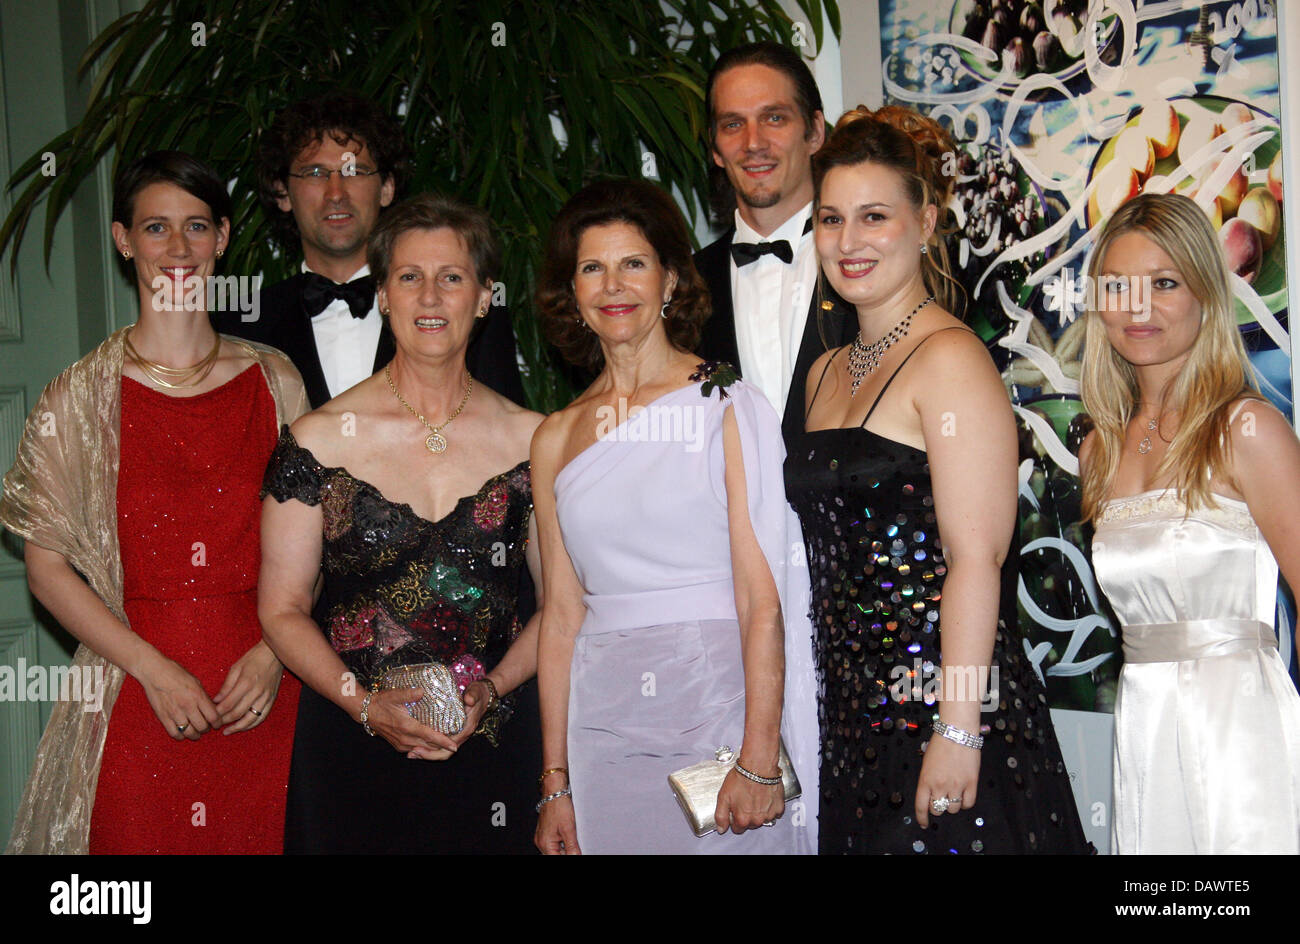 (L-R) Countess Bettina Bernadotte, her husband Philipp Haug, Countess Sonja Bernadotte, Queen Silvia of Sweden, Count Bjoern Bernadotte, Countess Diana Bernadotte and Count Bojern's girlfriend Sandra Angerer pose for the photographers during a charity gala at Lake Constance island Mainau, Germany, 15 June 2007. The gala raised funds in favour of Queen Silvia's Mentor foundation and Stock Photo